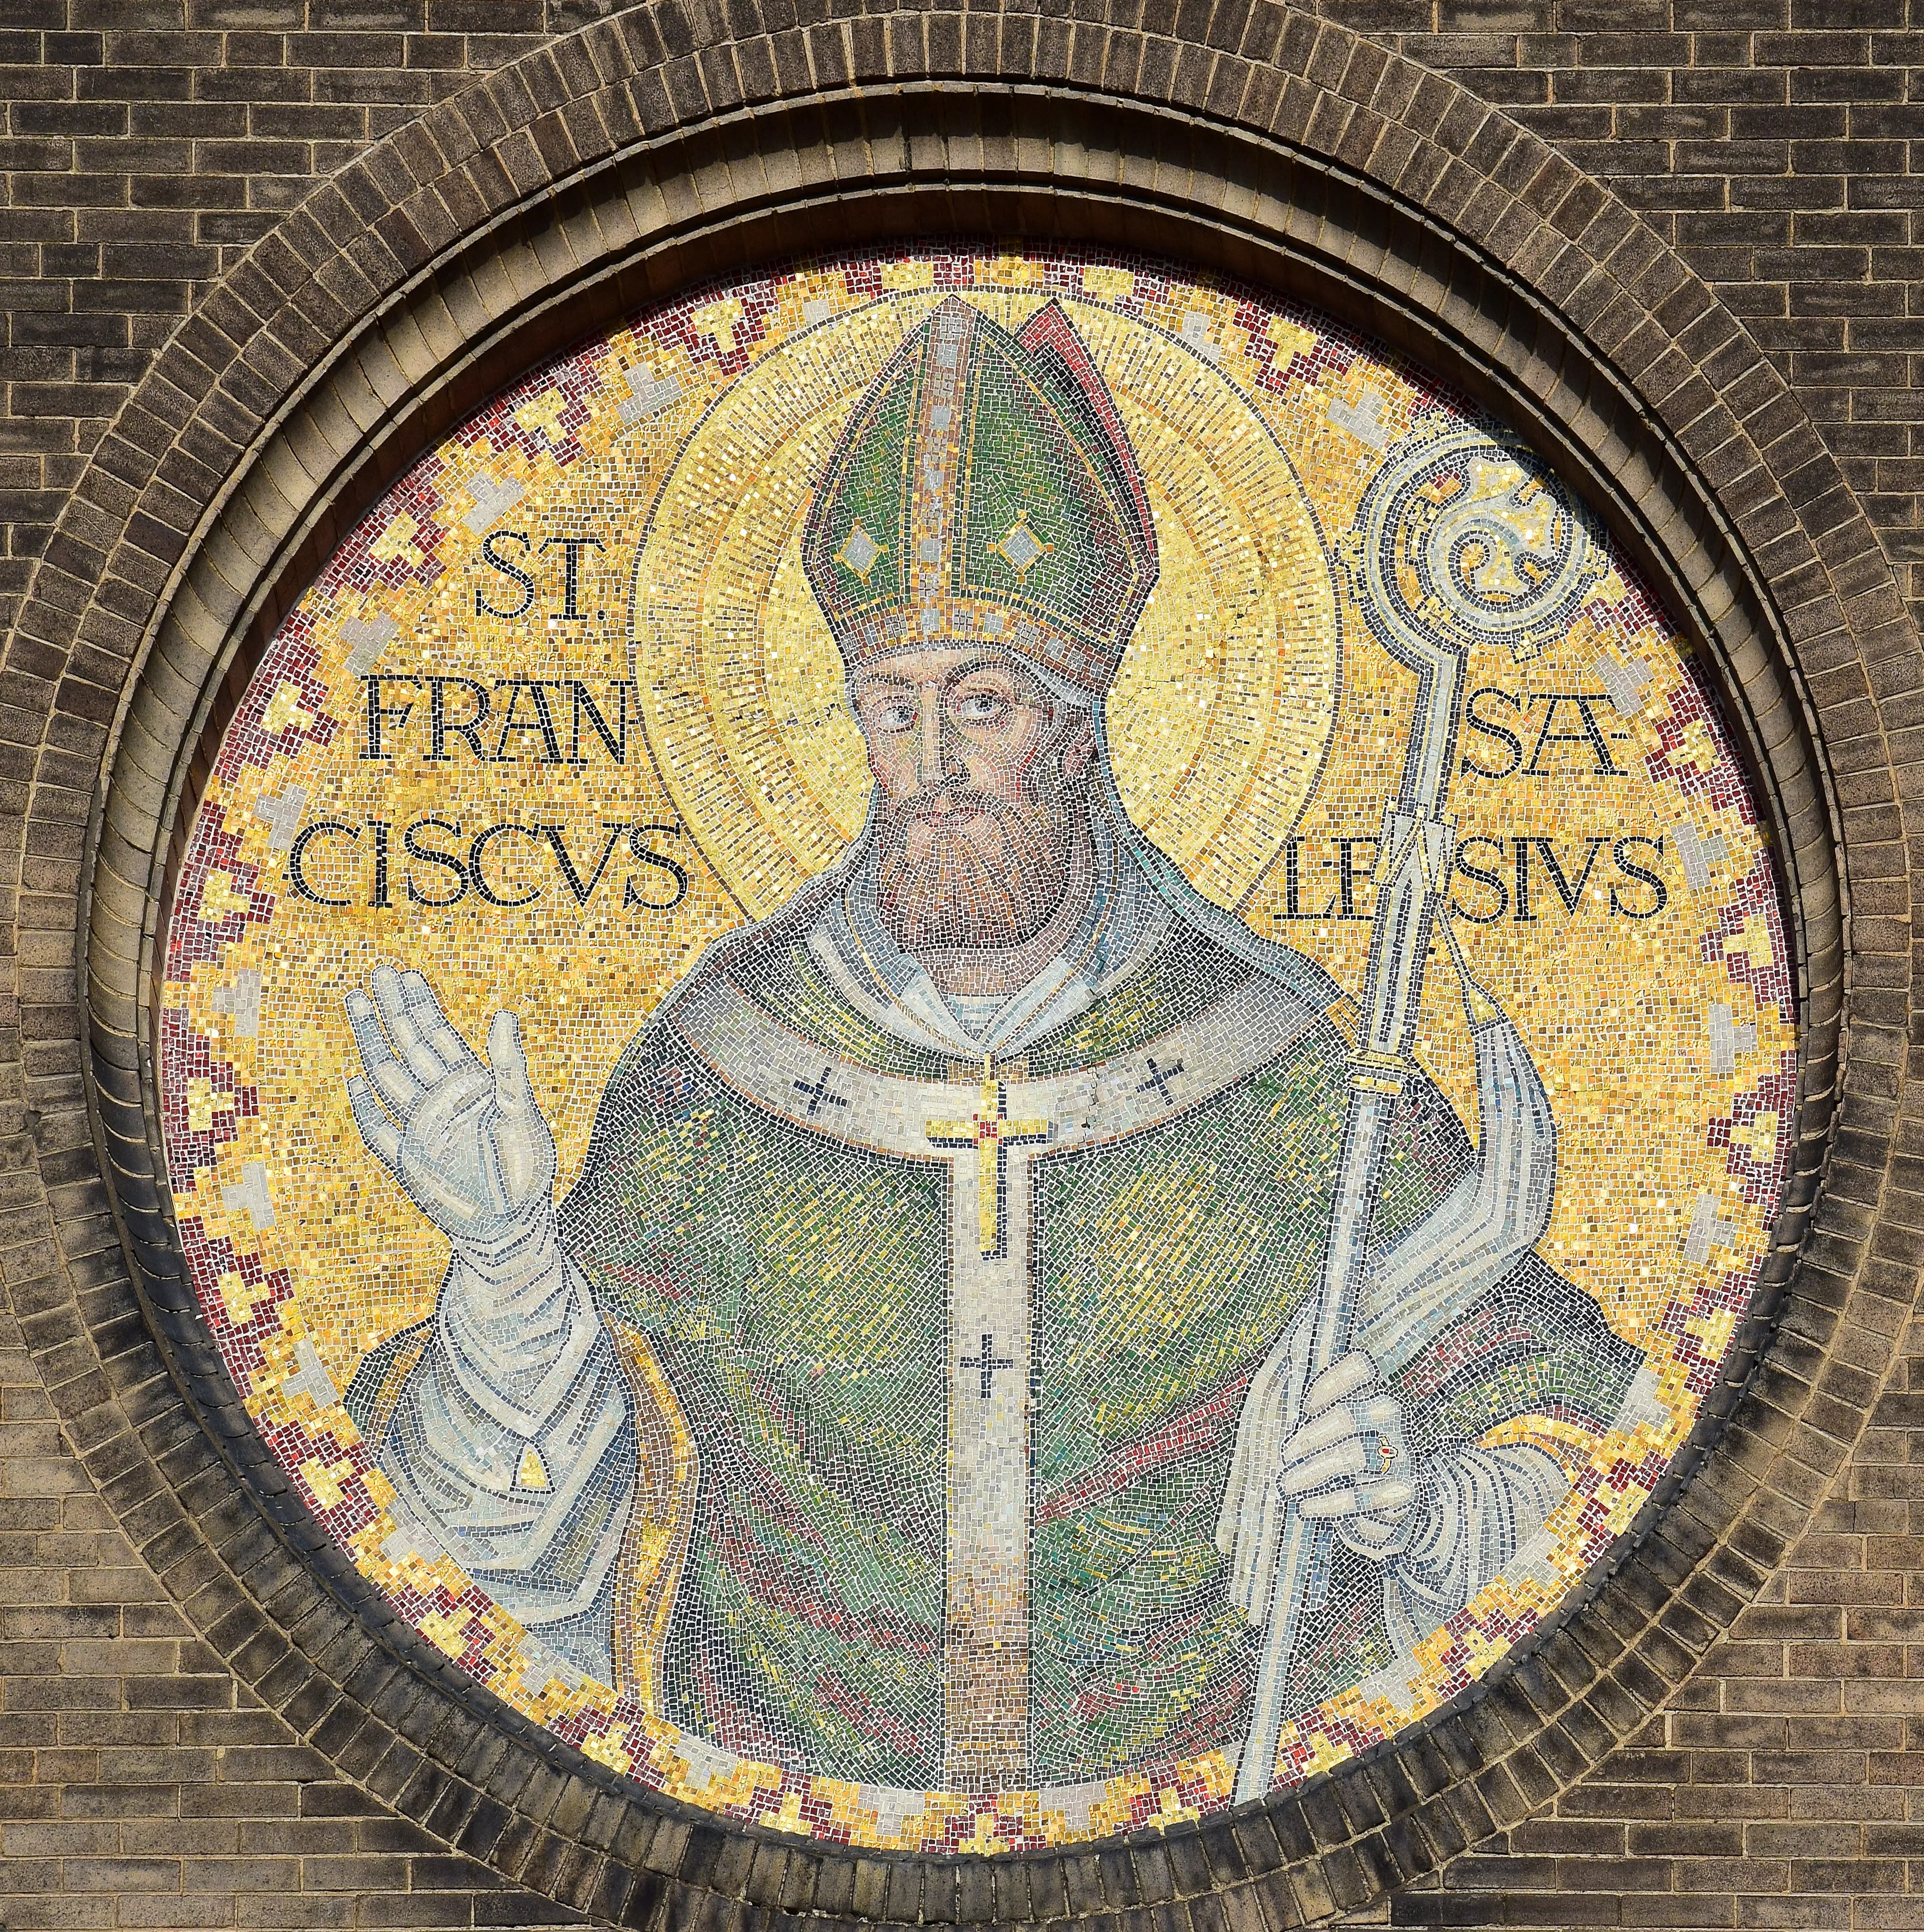 Mosaic of Sales on the exterior of St. Francis de Sales Oratory in St. Louis.?w=200&h=150